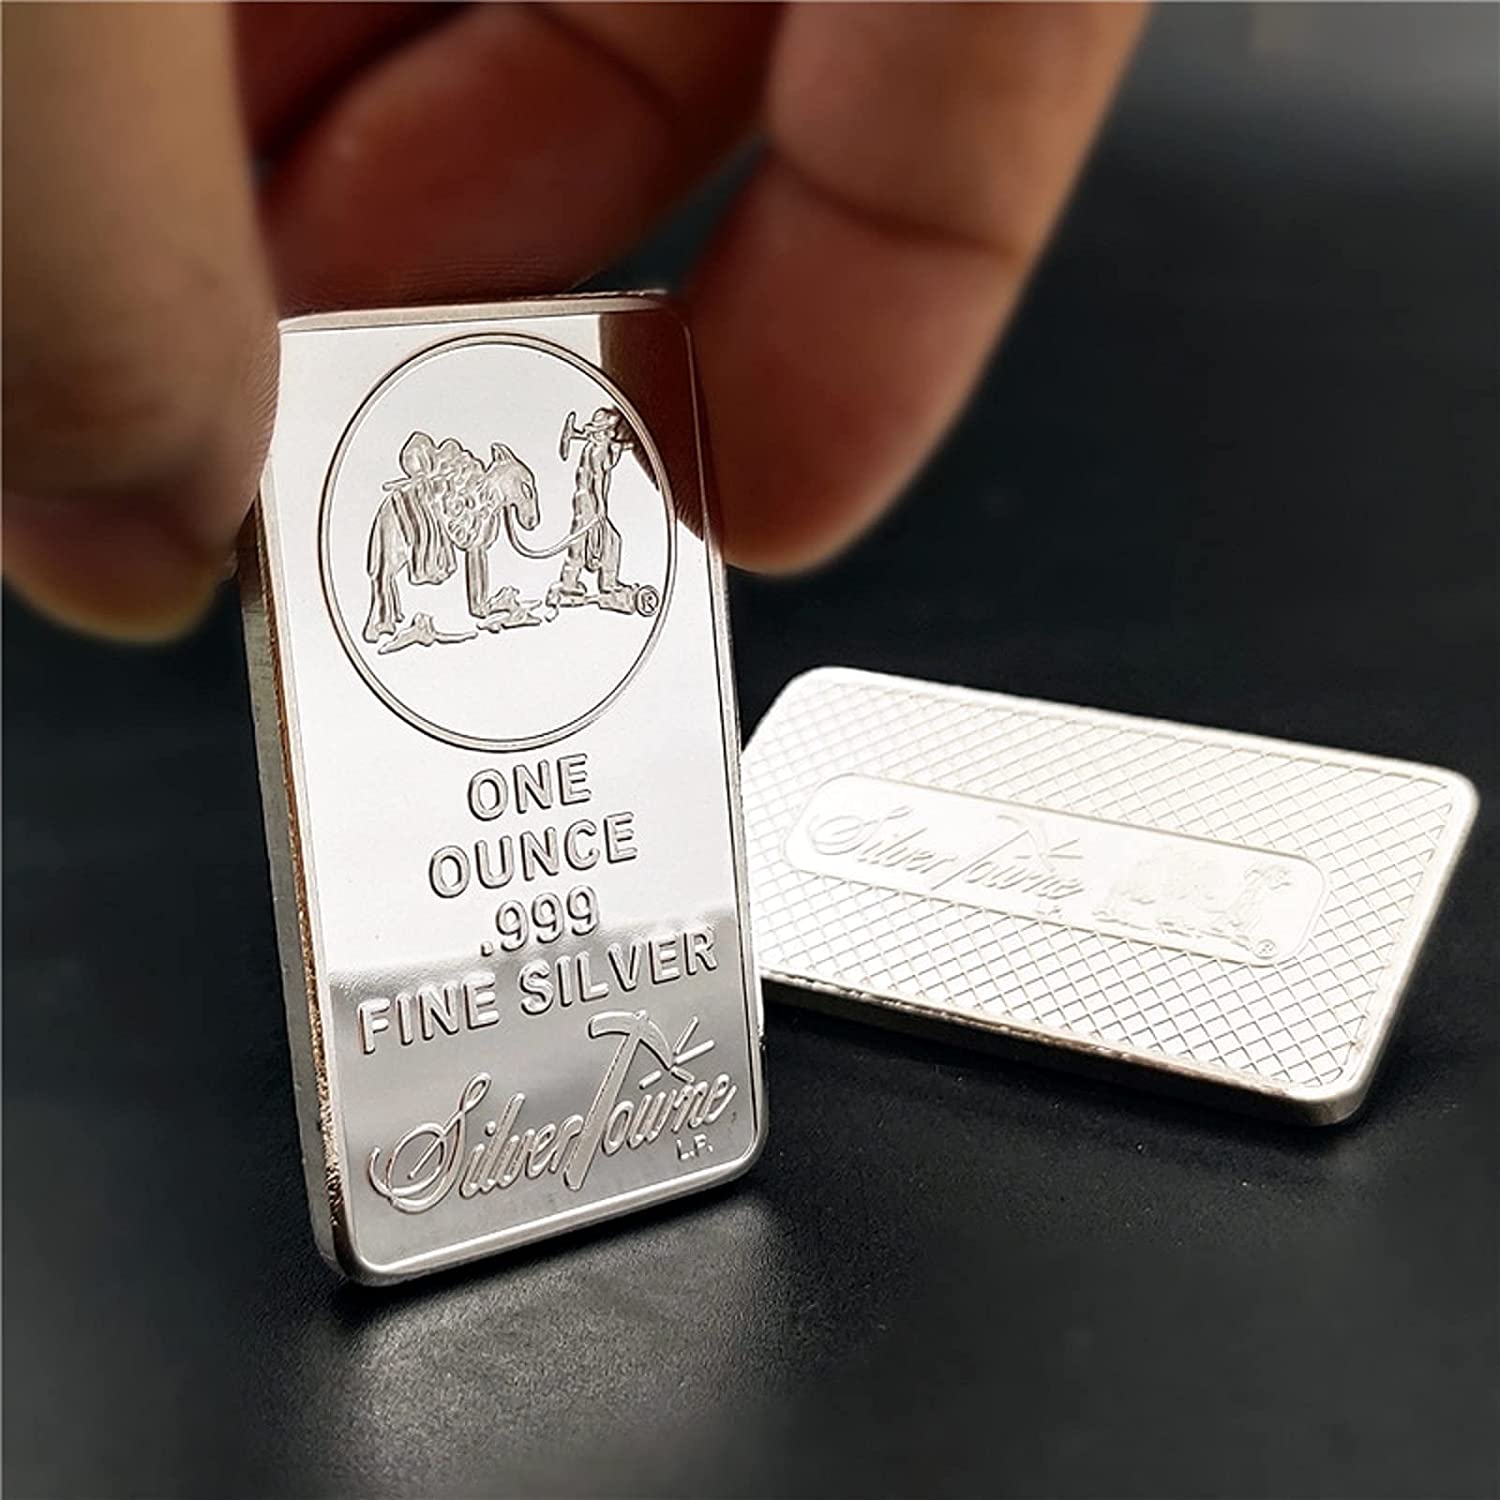 Silver Bars Replica American Prospector, Steel Material with Silver Plated Coin Collection Souvenir Bar, Home & Kitchen